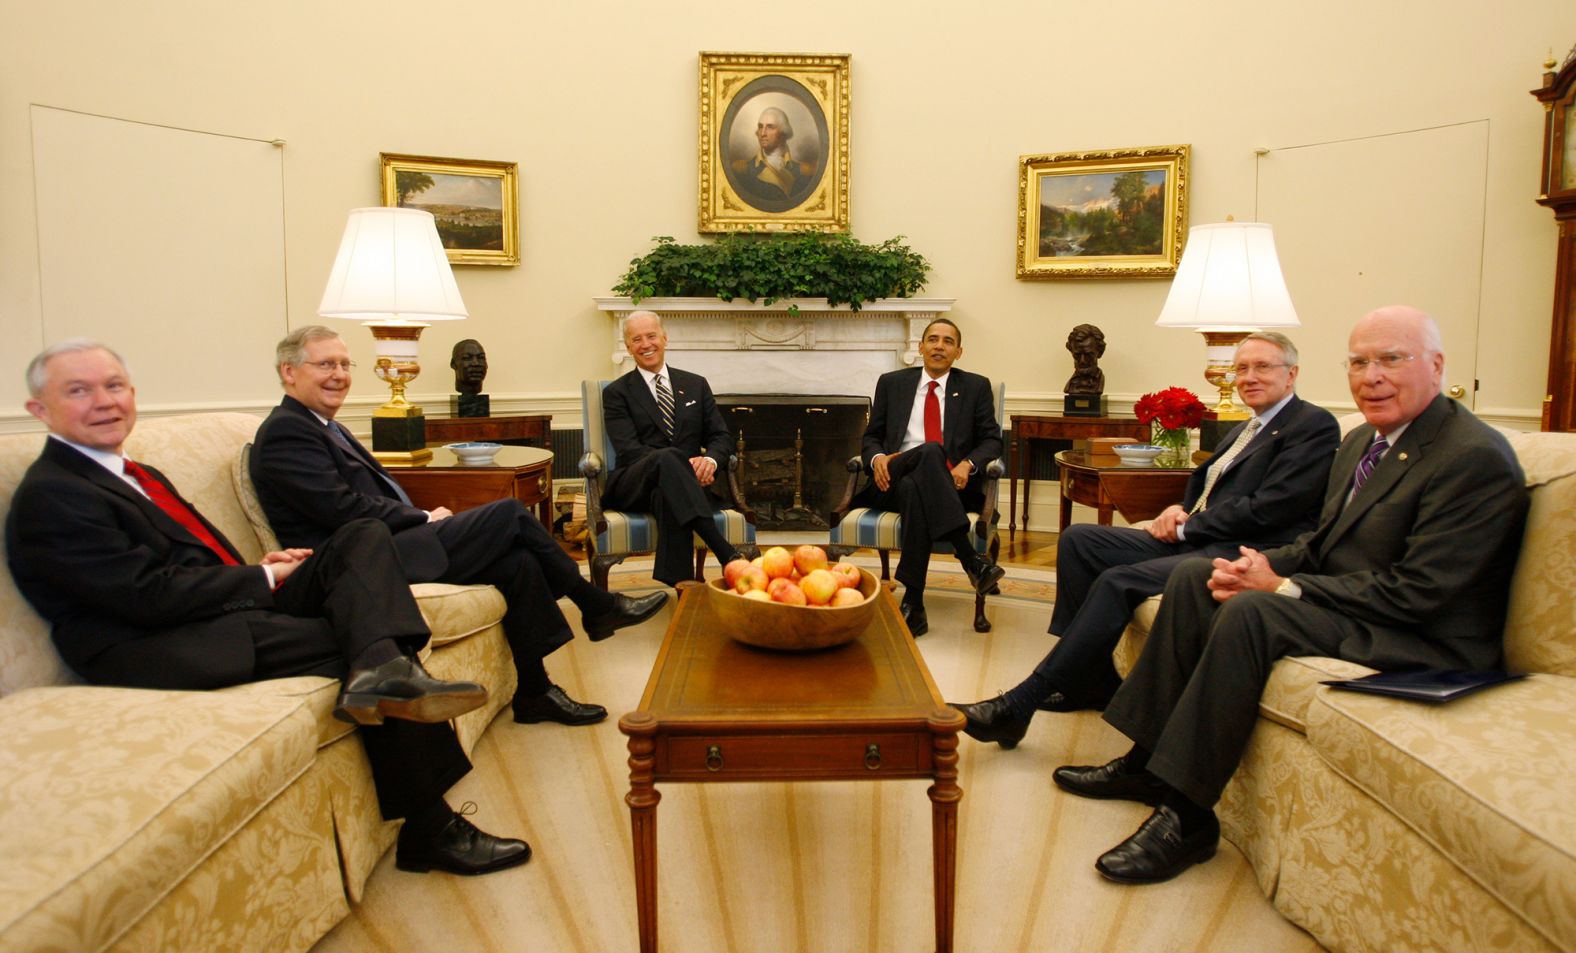 McConnell, second from left, attends an Oval Office meeting about an impending Supreme Court vacancy in May 2009. From left are US Sen. Jeff Sessions, McConnell, Vice President Joe Biden, President Barack Obama, Senate Majority Leader Harry Reid and US Sen. Patrick Leahy. McConnell boldly blocked Merrick Garland, Obama's choice for the Supreme Court, and later worked to install Trump's pick Neil Gorsuch instead.